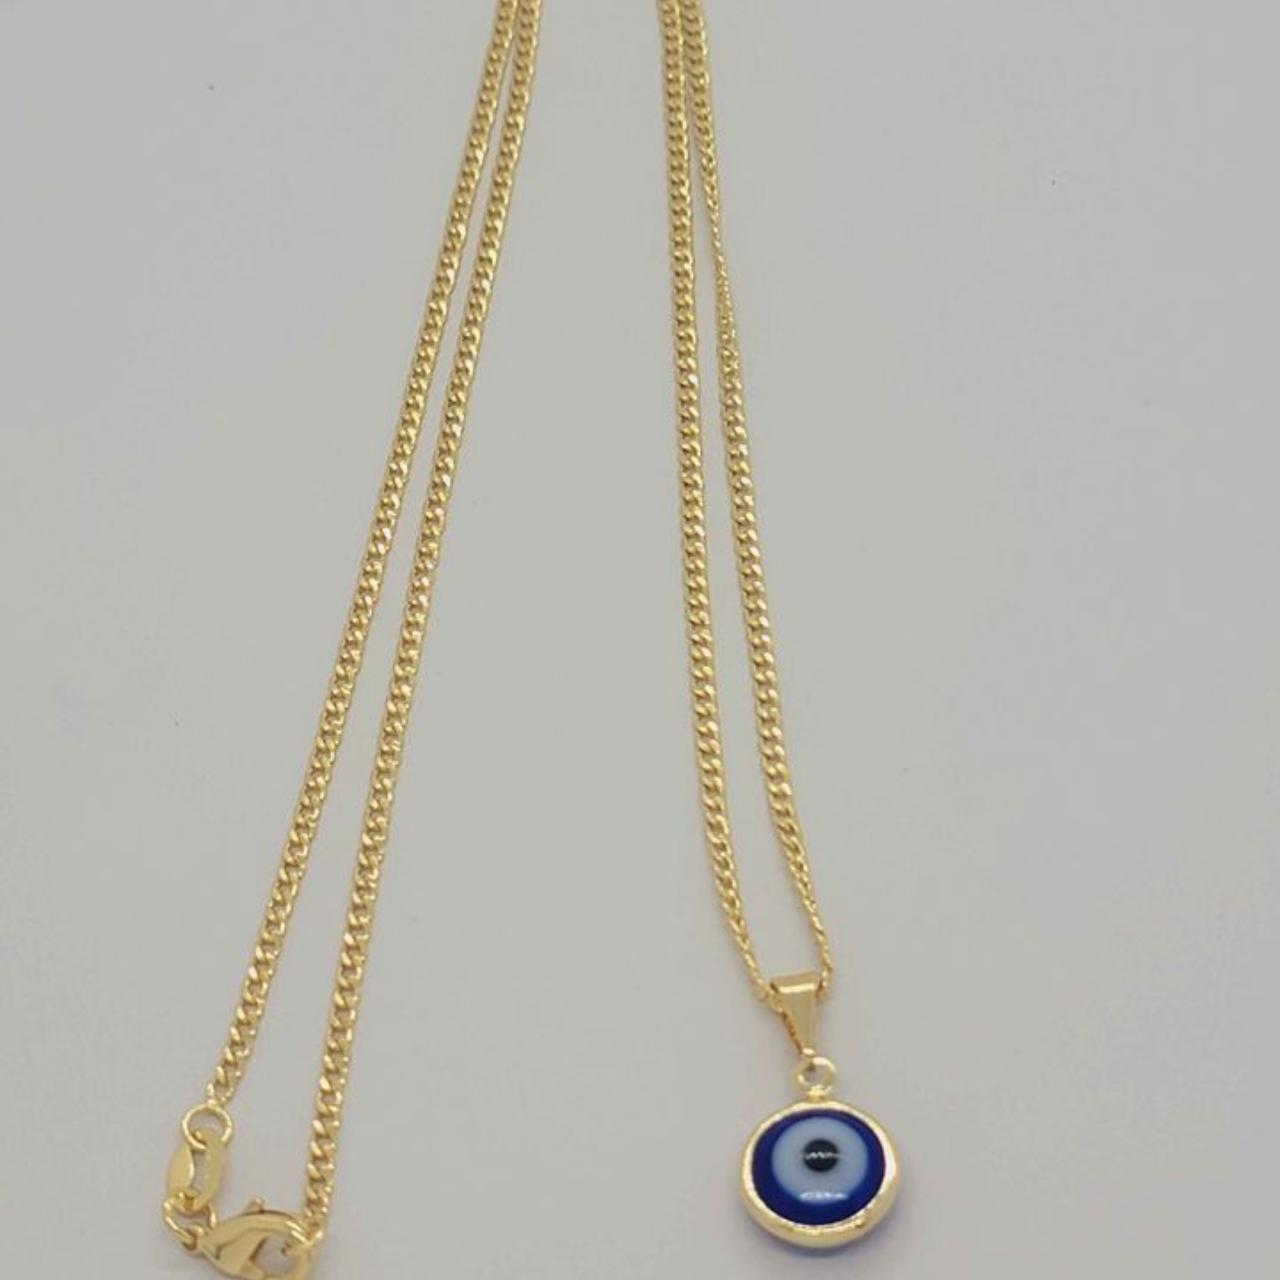 Women's Gold and Blue Jewellery (2)